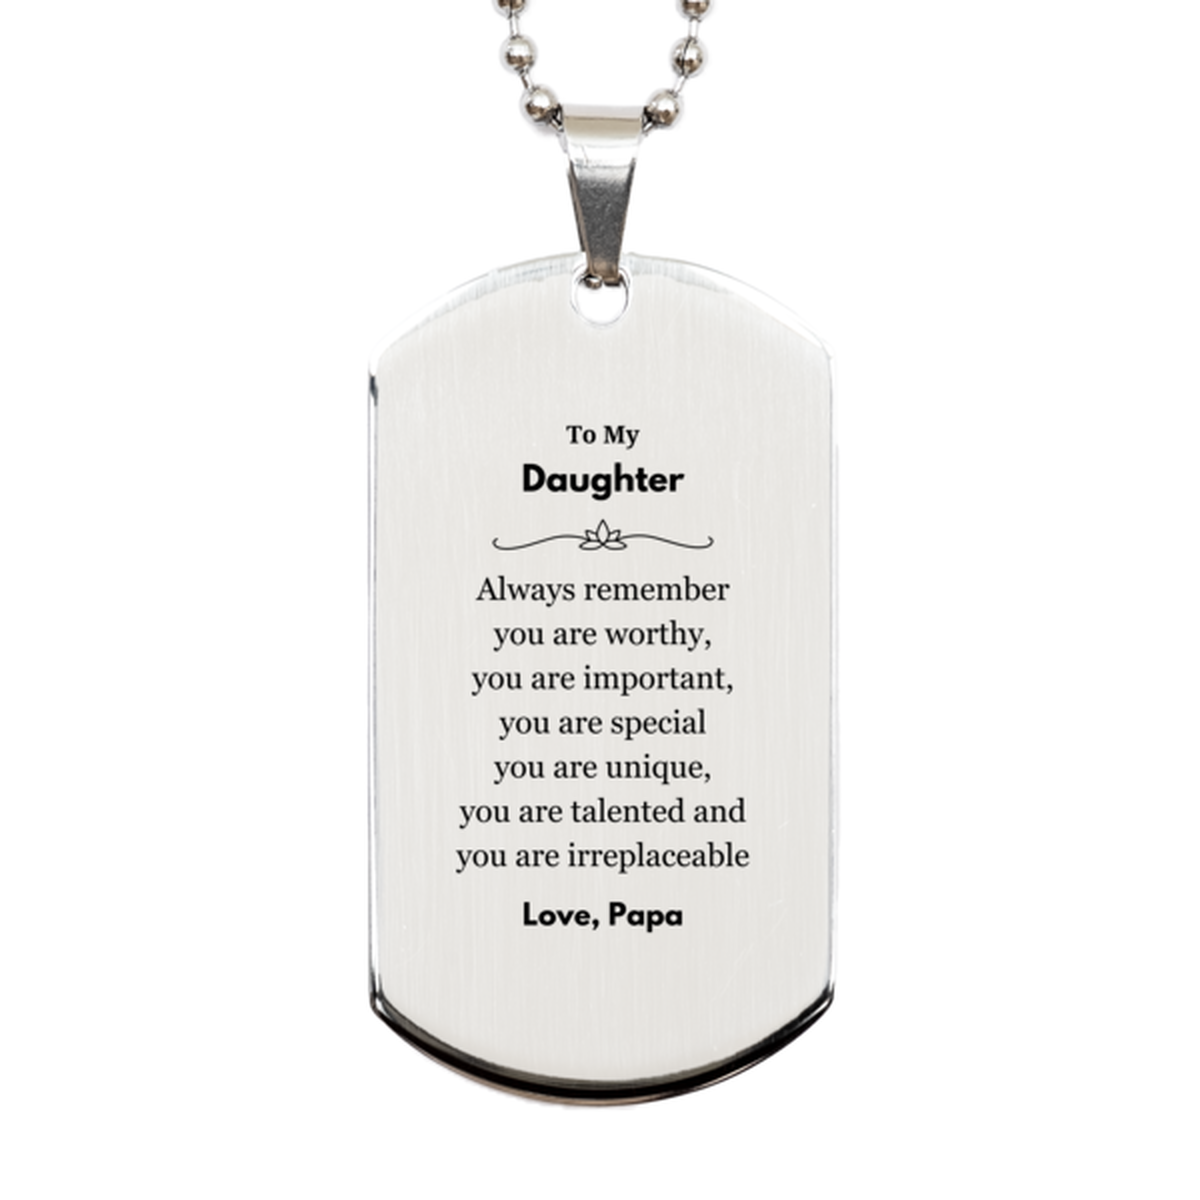 Daughter Birthday Gifts from Papa, Inspirational Silver Dog Tag for Daughter Christmas Graduation Gifts for Daughter Always remember you are worthy, you are important. Love, Papa